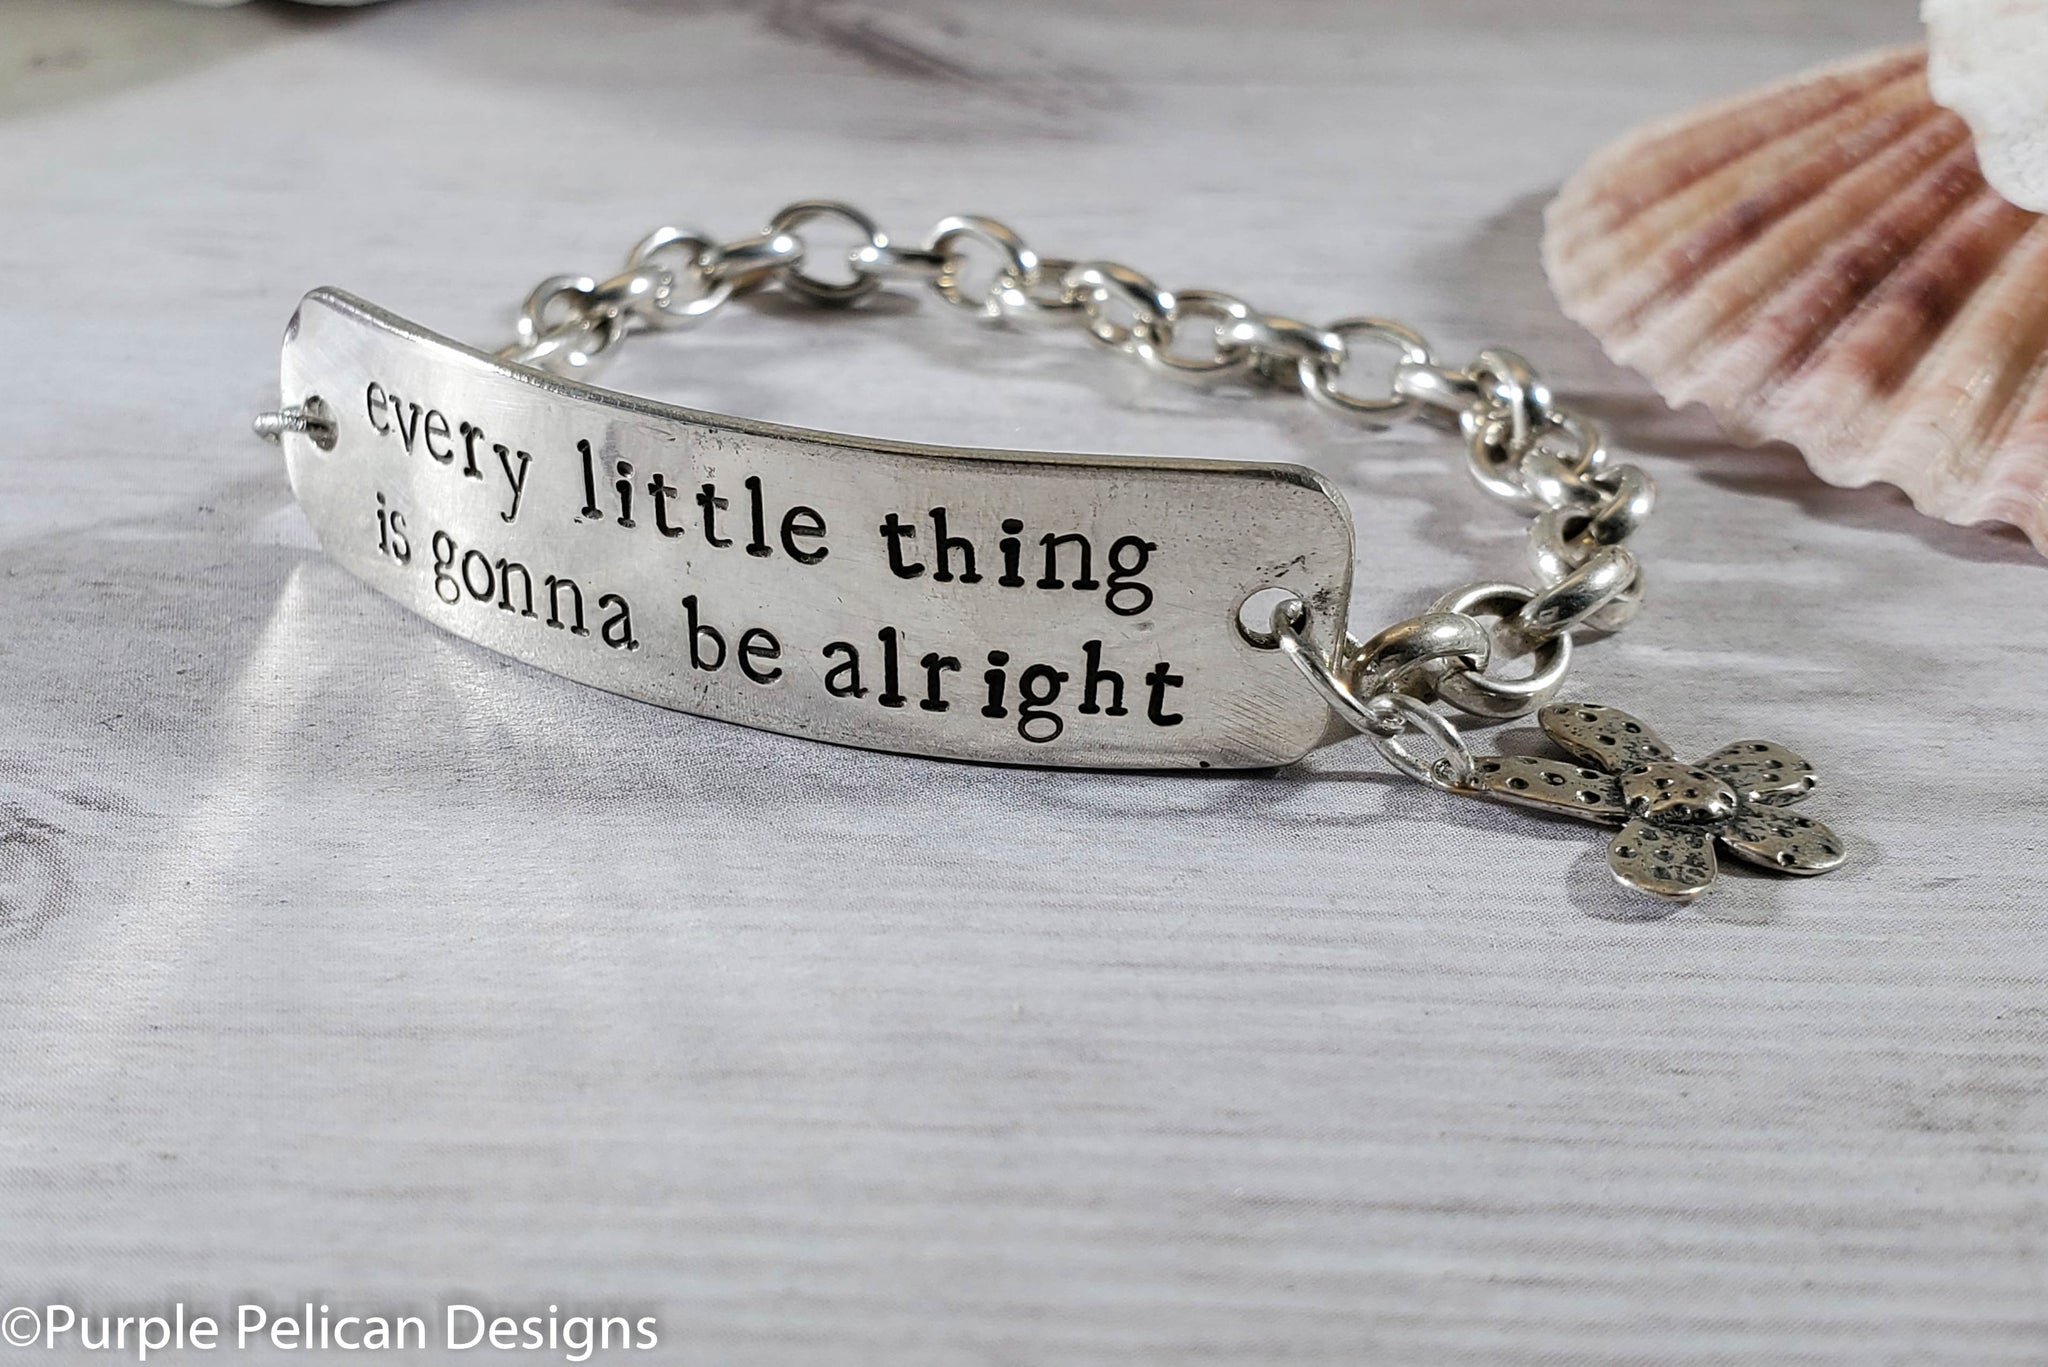 The Best Engraving Quotes for Bracelets & Necklaces - LaCkore Couture